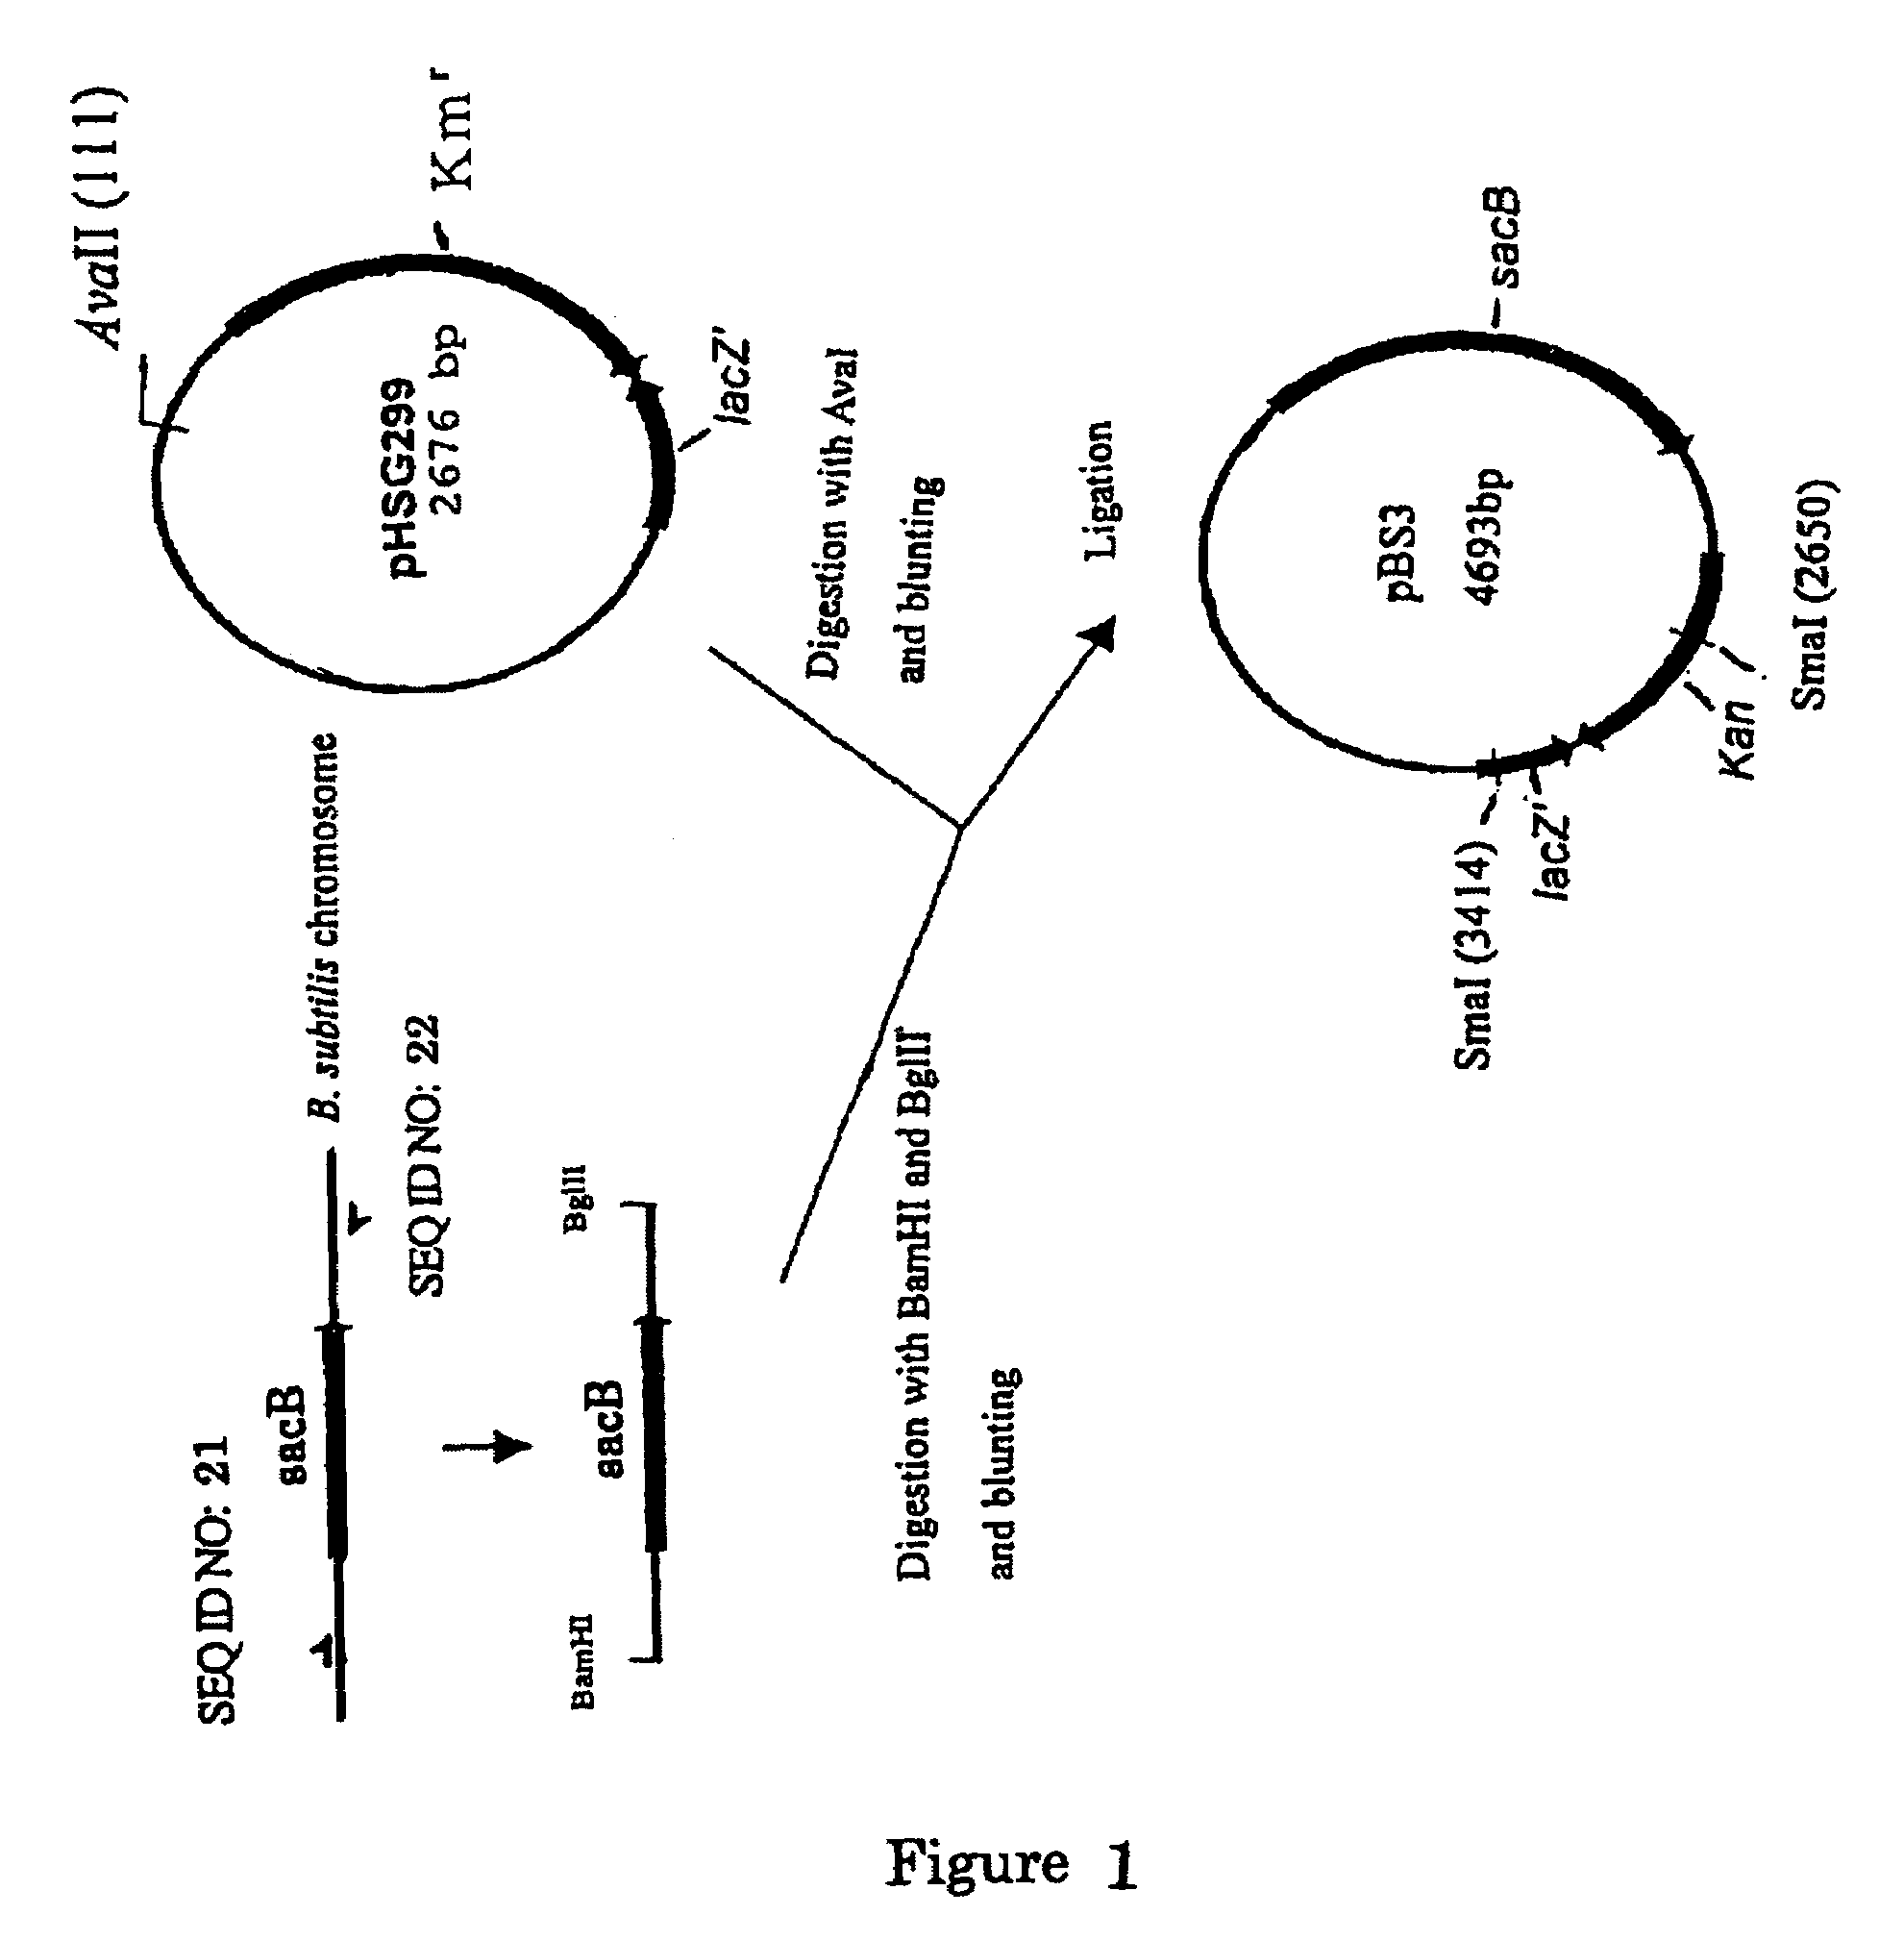 L-glutamic acid-producing microorganism and a method for producing L-glutamic acid